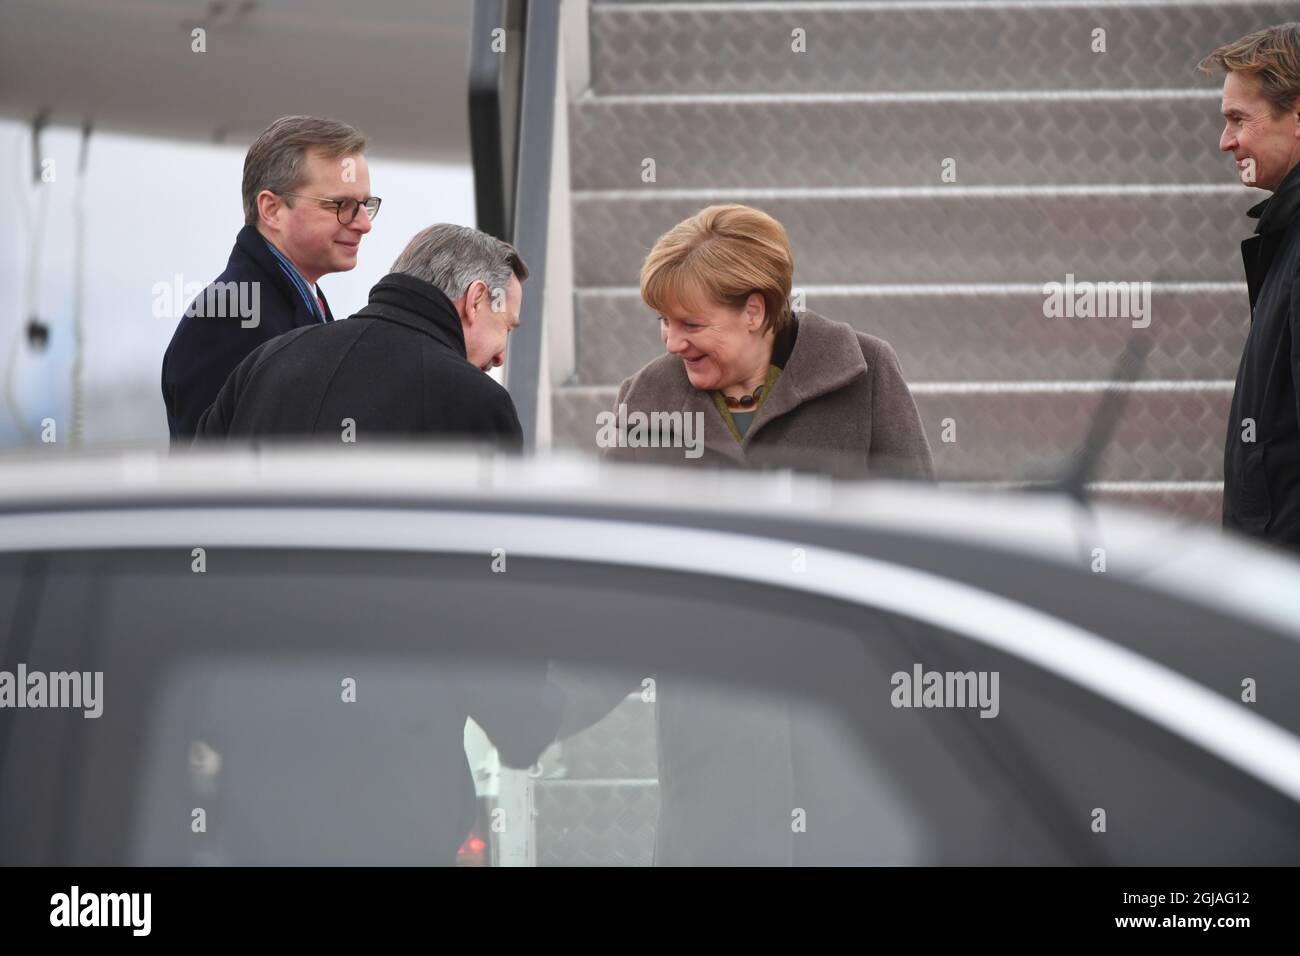 German Chancellor Angela Merkel (2ndR) is greeted by Mikael Damberg, Sweden's Minister for Enterprise and Innovation (L) and Germany's ambassdor to Sweden Hans-Juergen Heimsoeth (2dL) upon arrival to Arlanda Airport outside Stockholm, Sweden on Jan. 31, 2017. Merkel is on a one-day official visit to Sweden. Photo: Fredrik Sandberg / TT / code 10080  Stock Photo